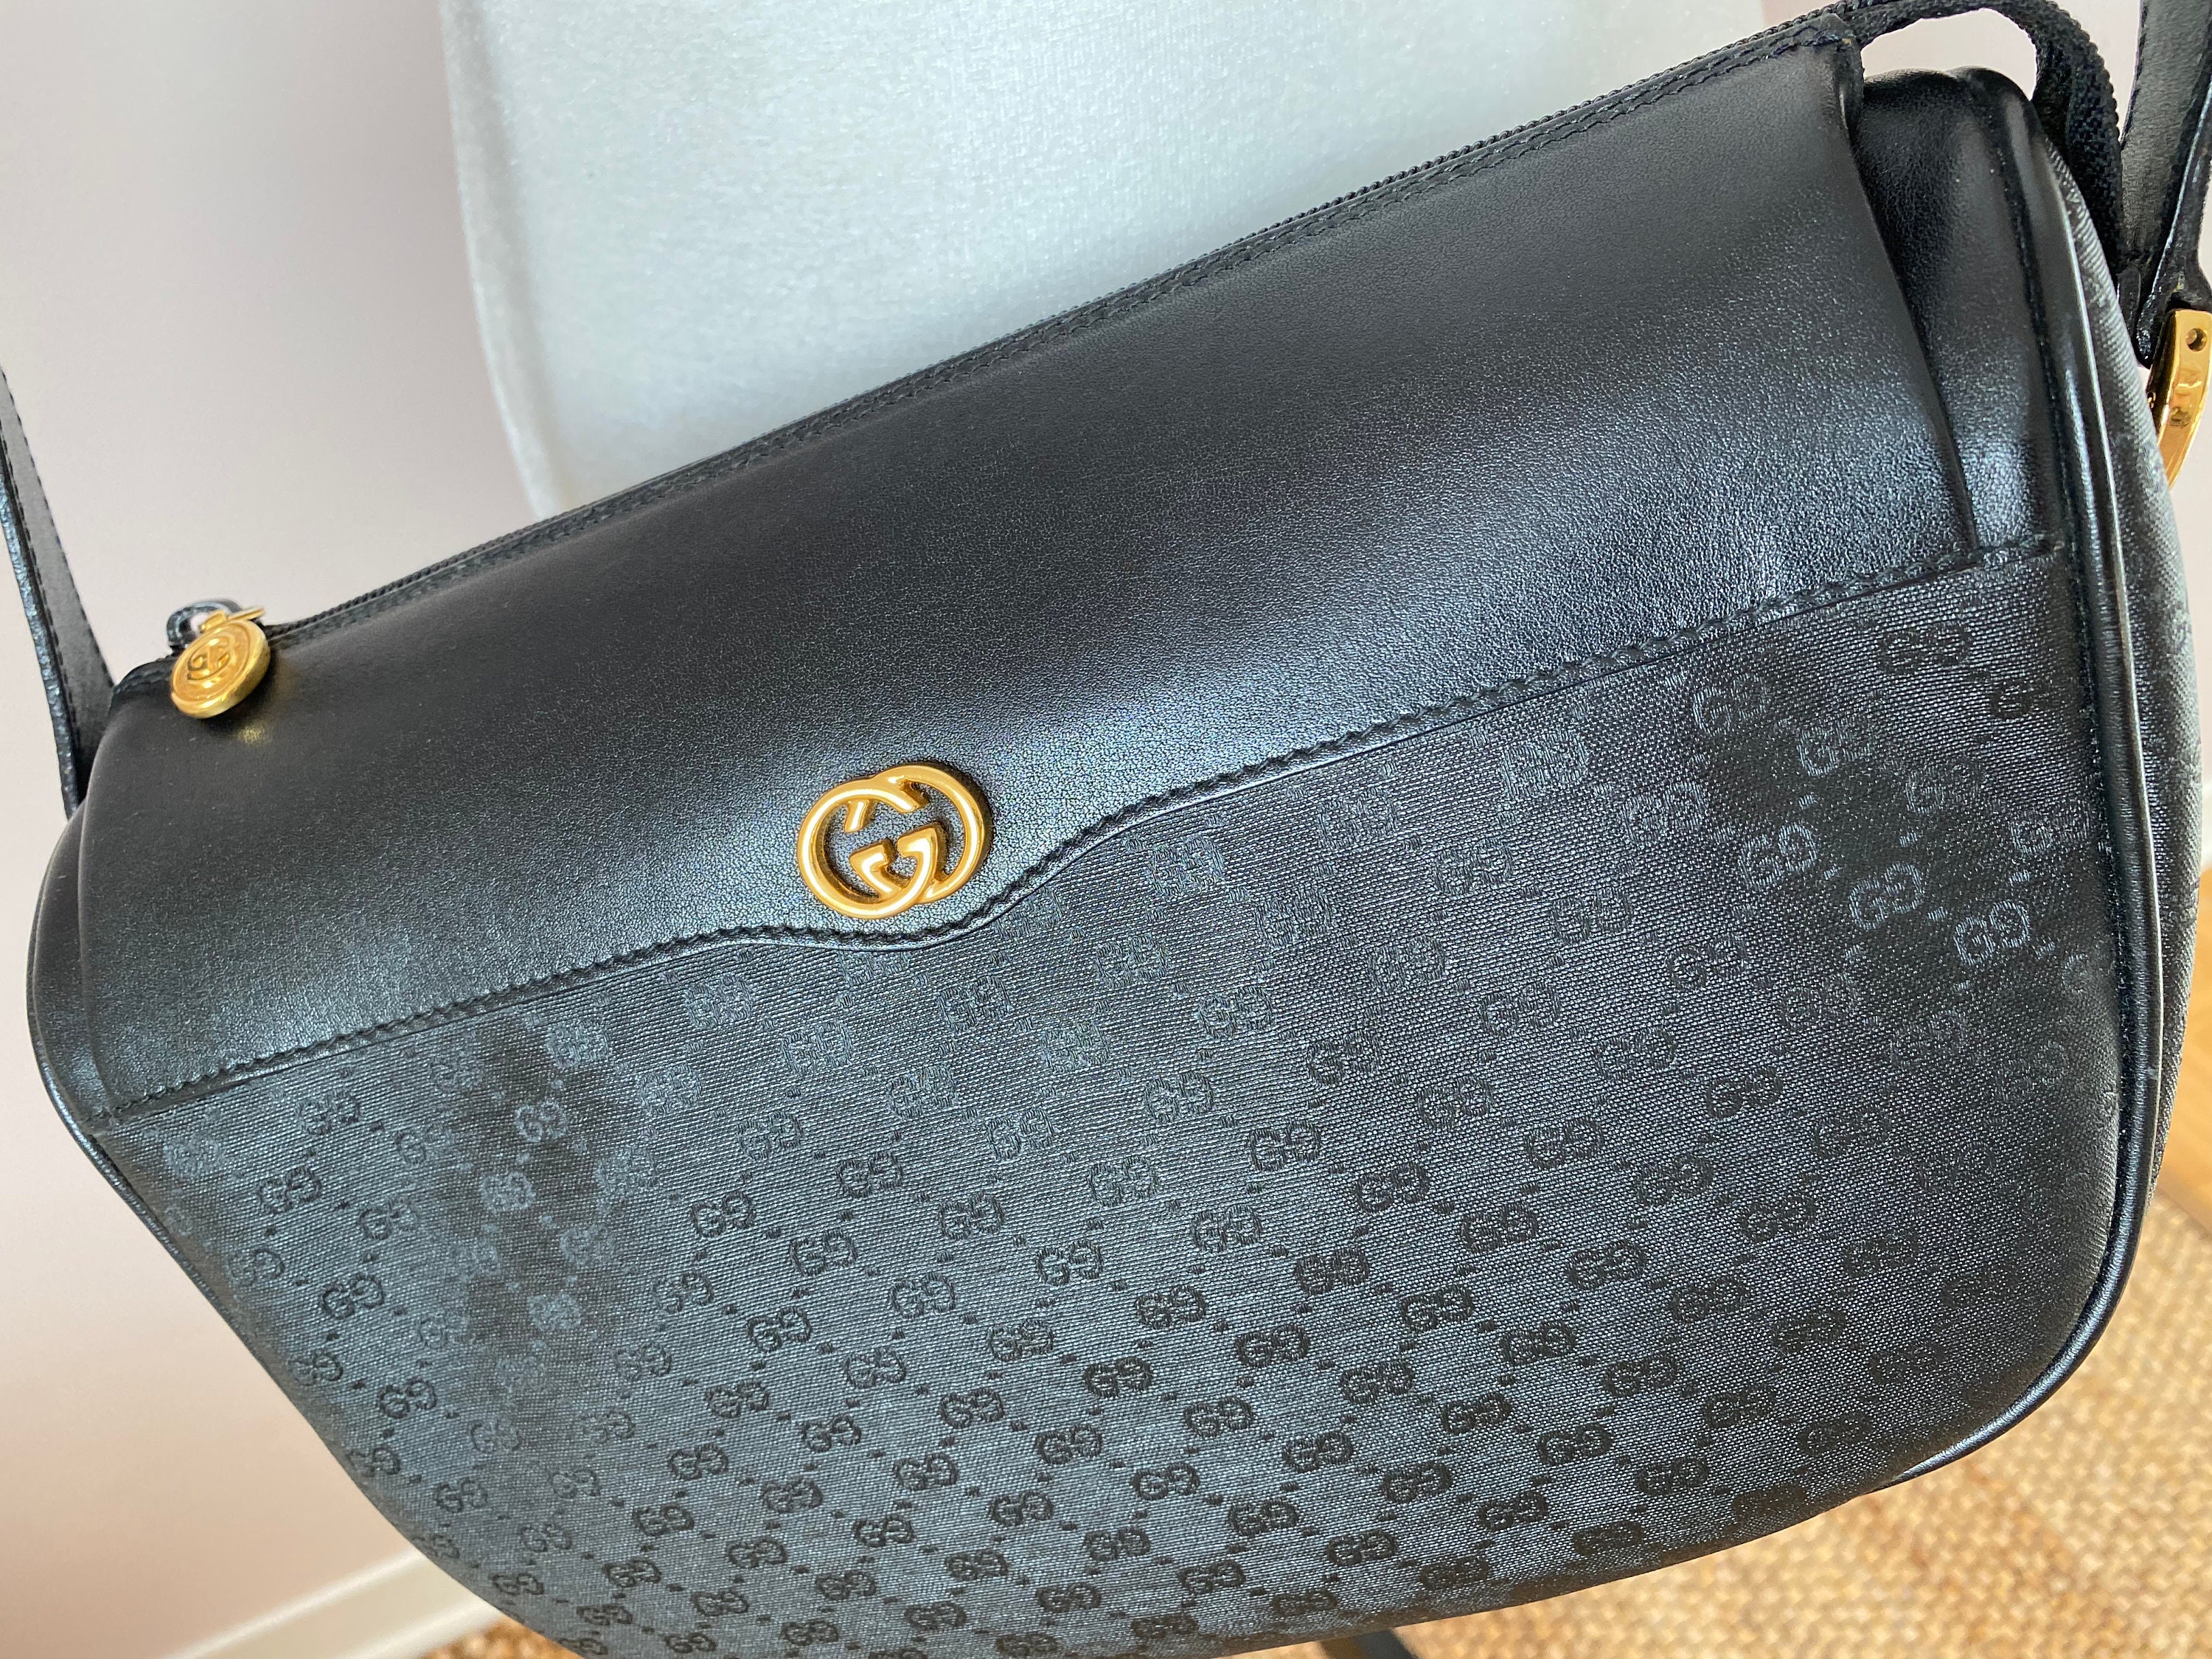 Gucci leather black bag made in italy ショルダーバッグ バッグ メンズ 華麗